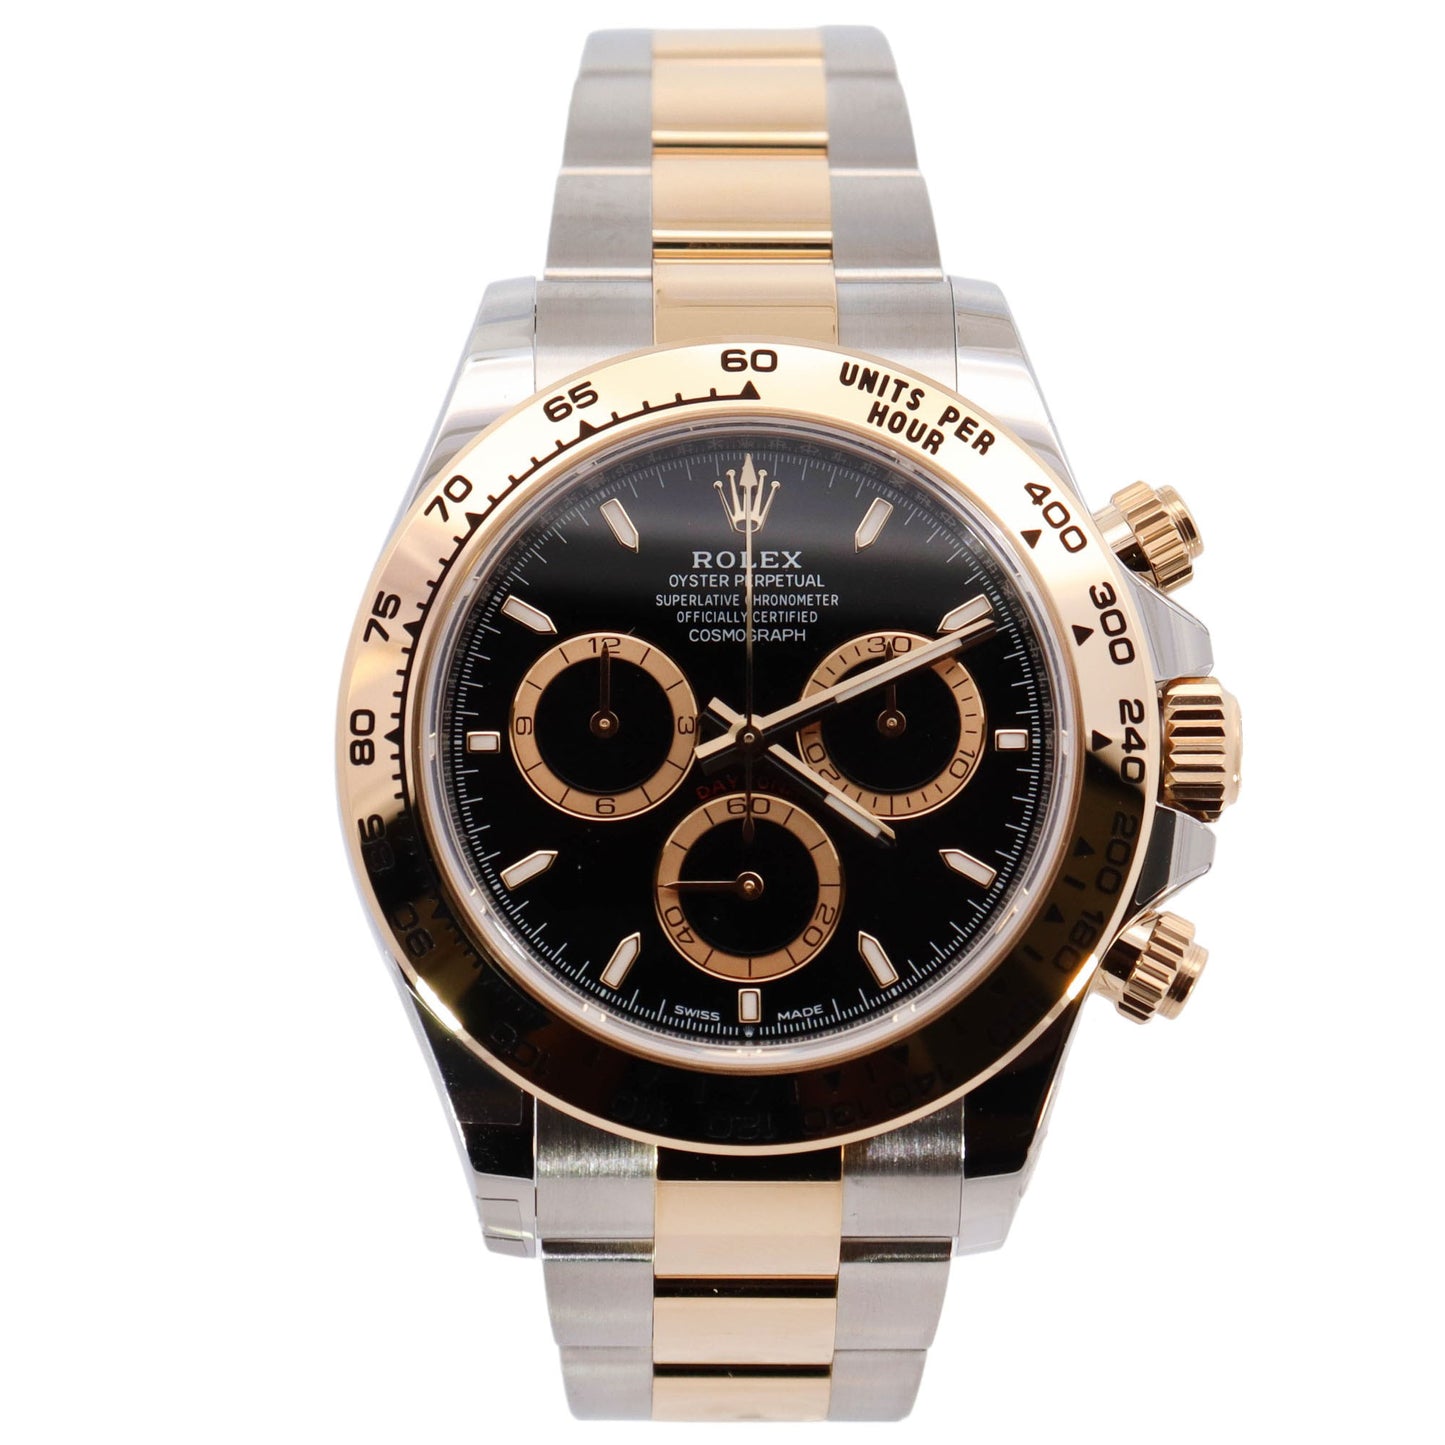 Rolex Daytona Two-Tone Stainless Steel & Yellow Gold 40mm Black Stick Dial Watch Reference# 126503